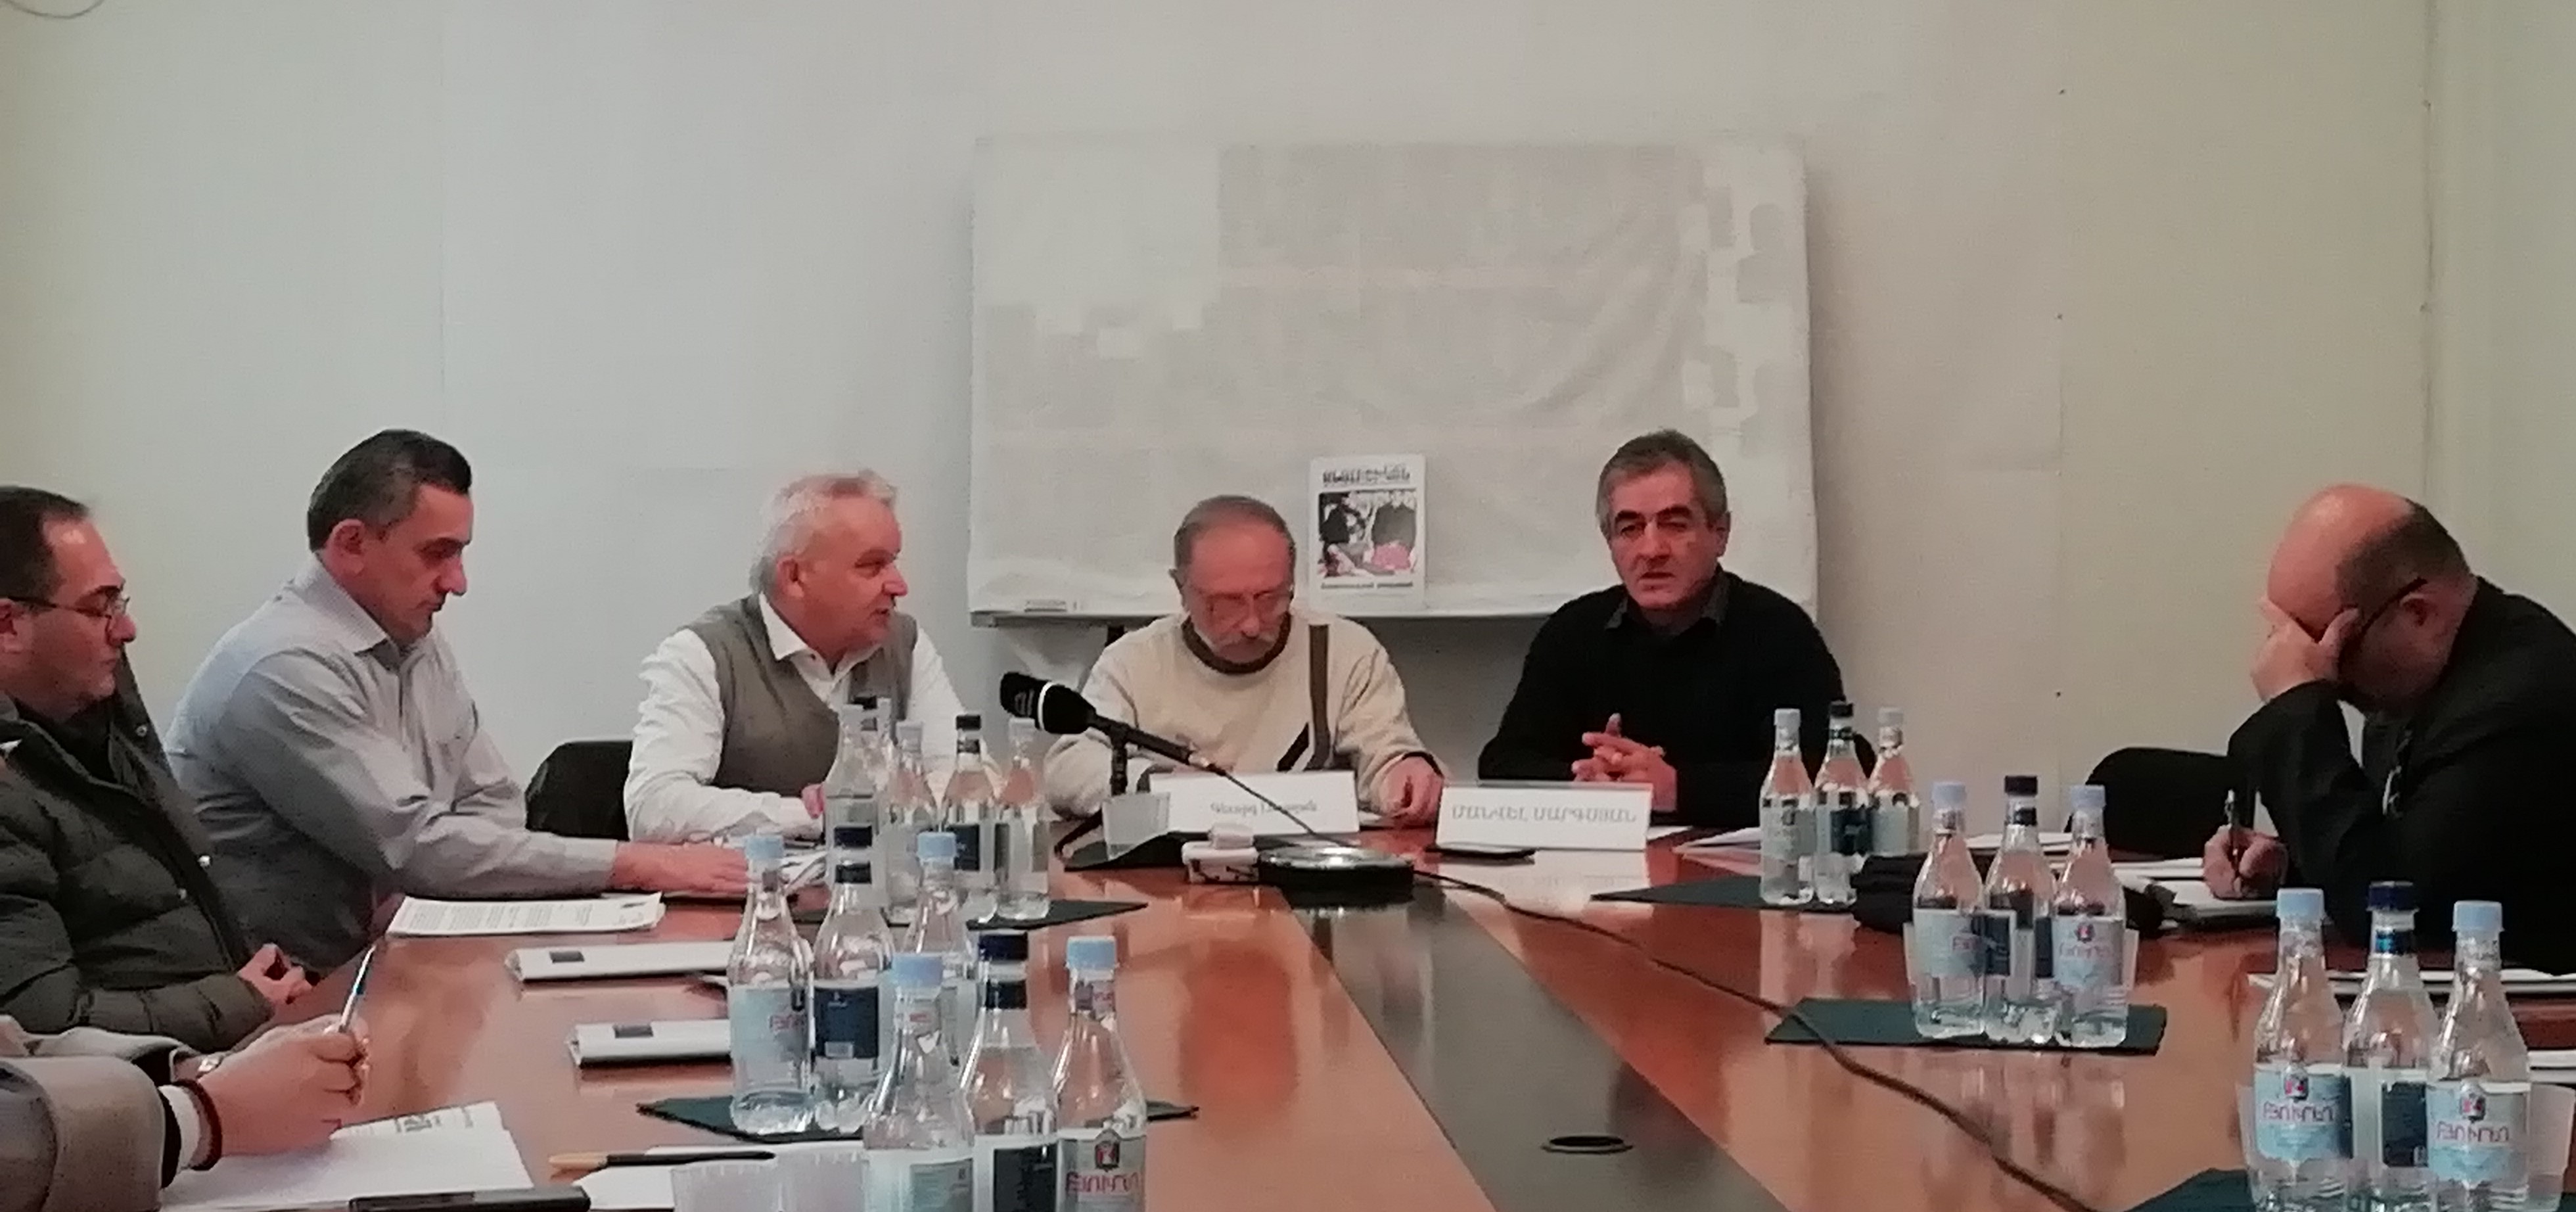 Presentation-Discussion at ACNIS Dedicated to the Vision of Peaceful Settlement in Artsakh